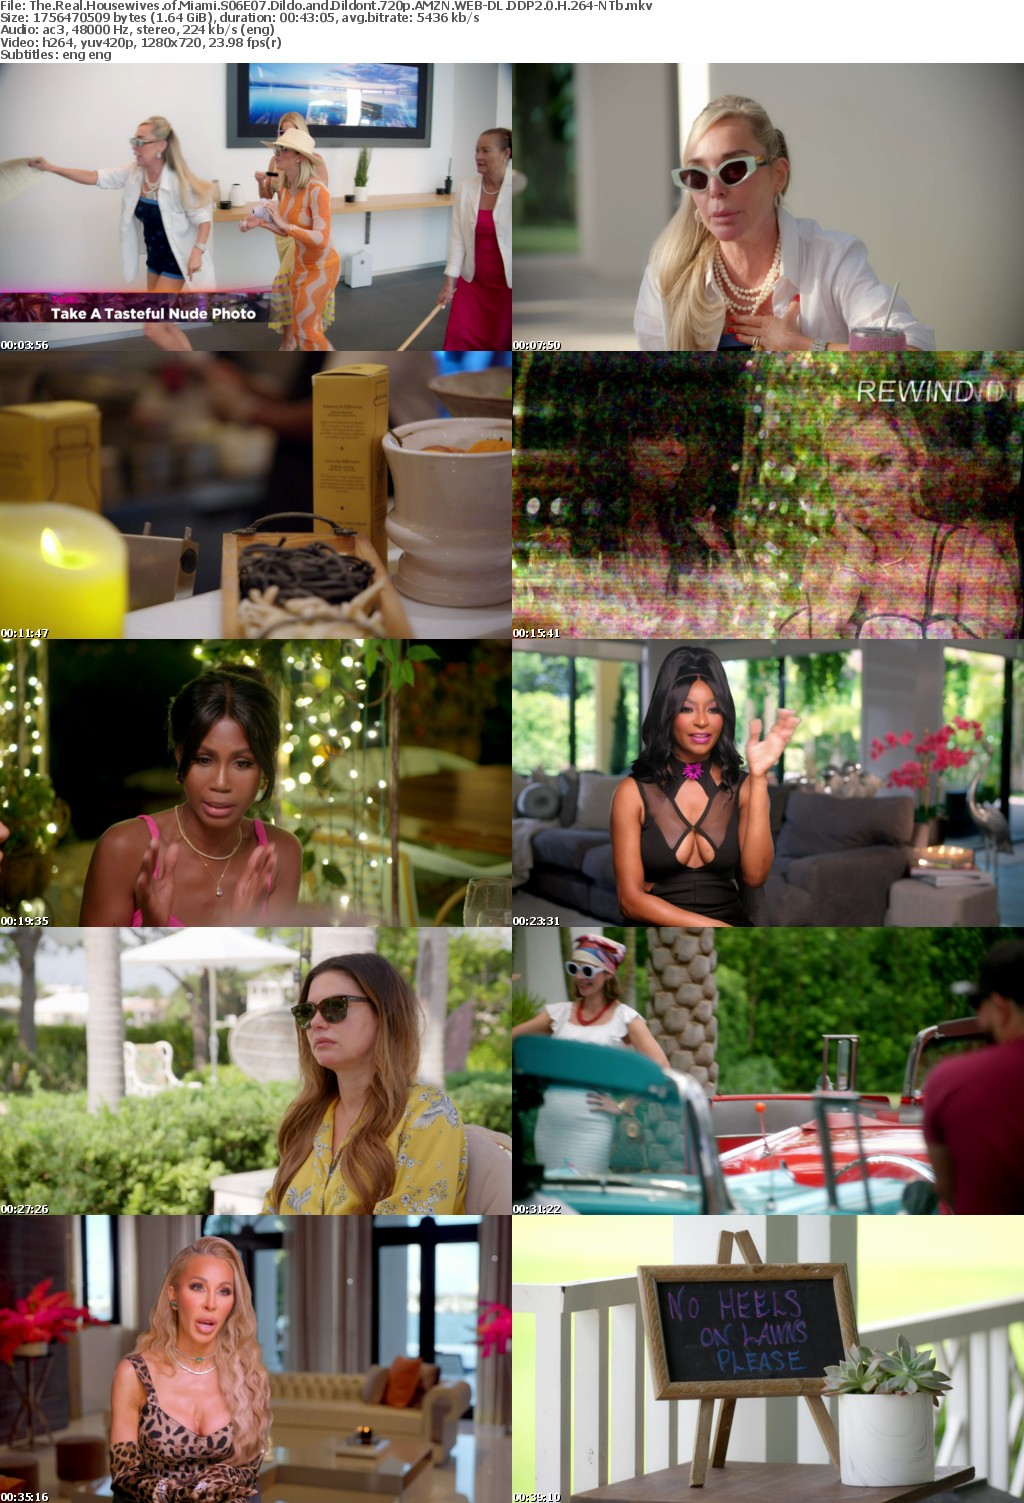 The Real Housewives of Miami S06E07 Dildo and Dildont 720p AMZN WEB-DL DDP2 0 H 264-NTb